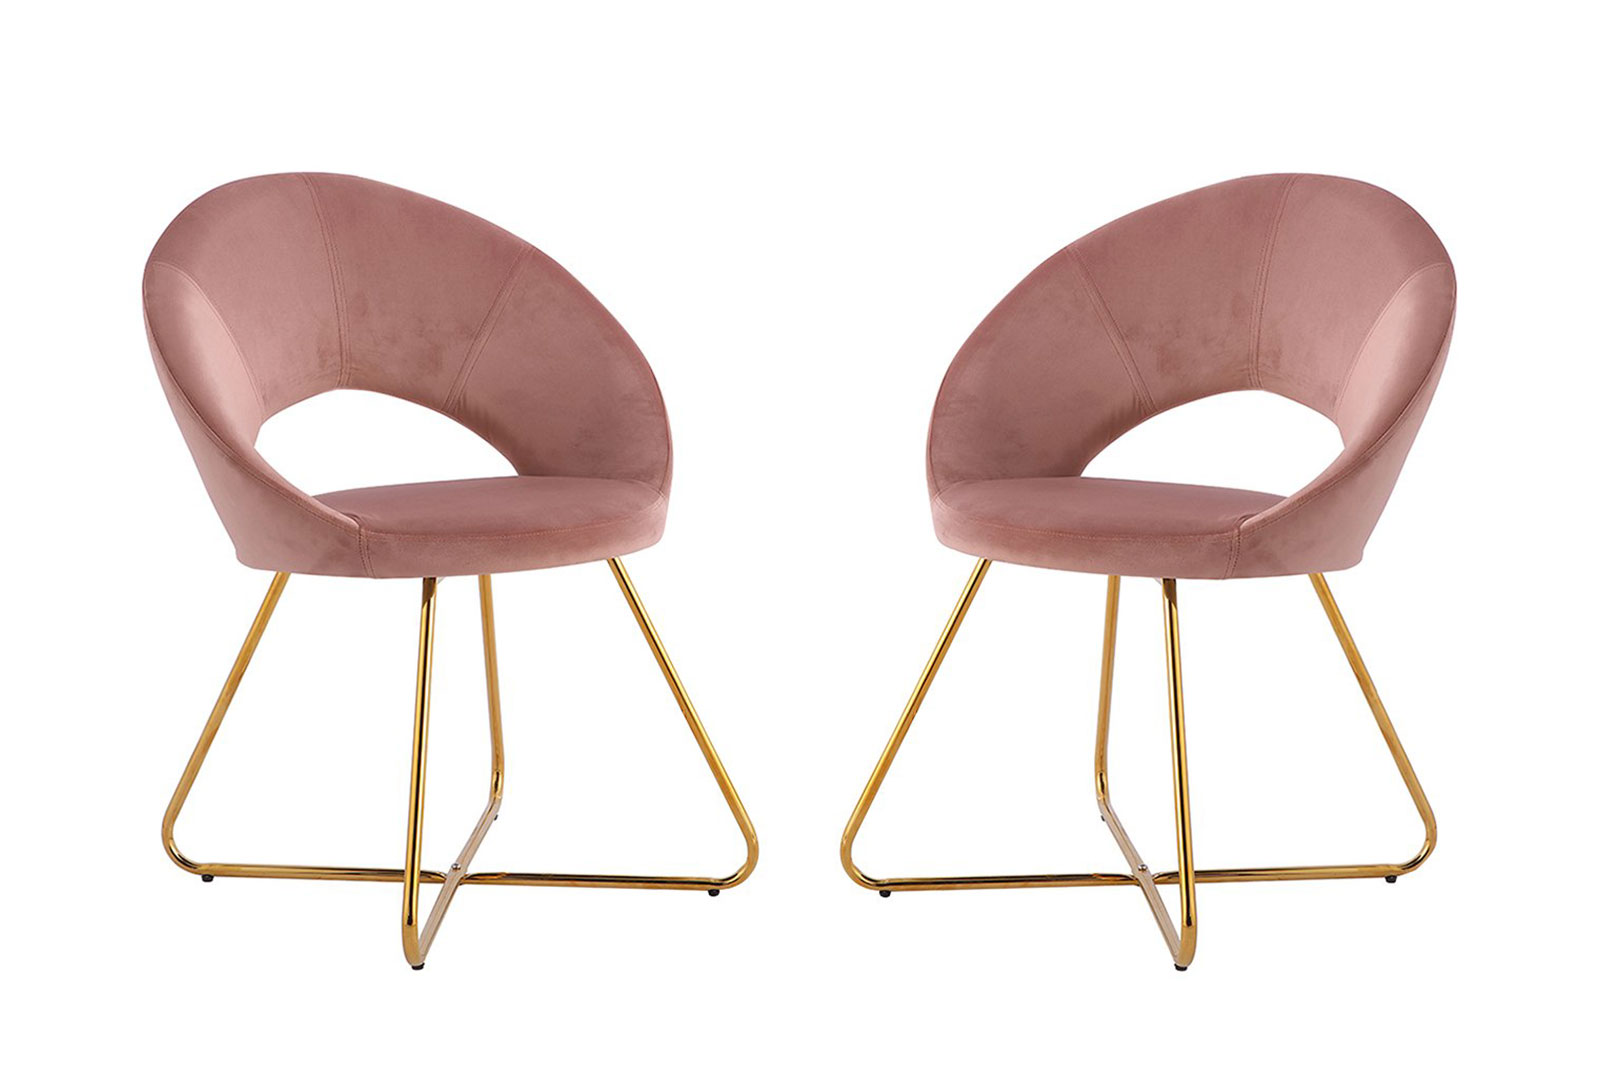 A set of two modern Archie 105 chairs